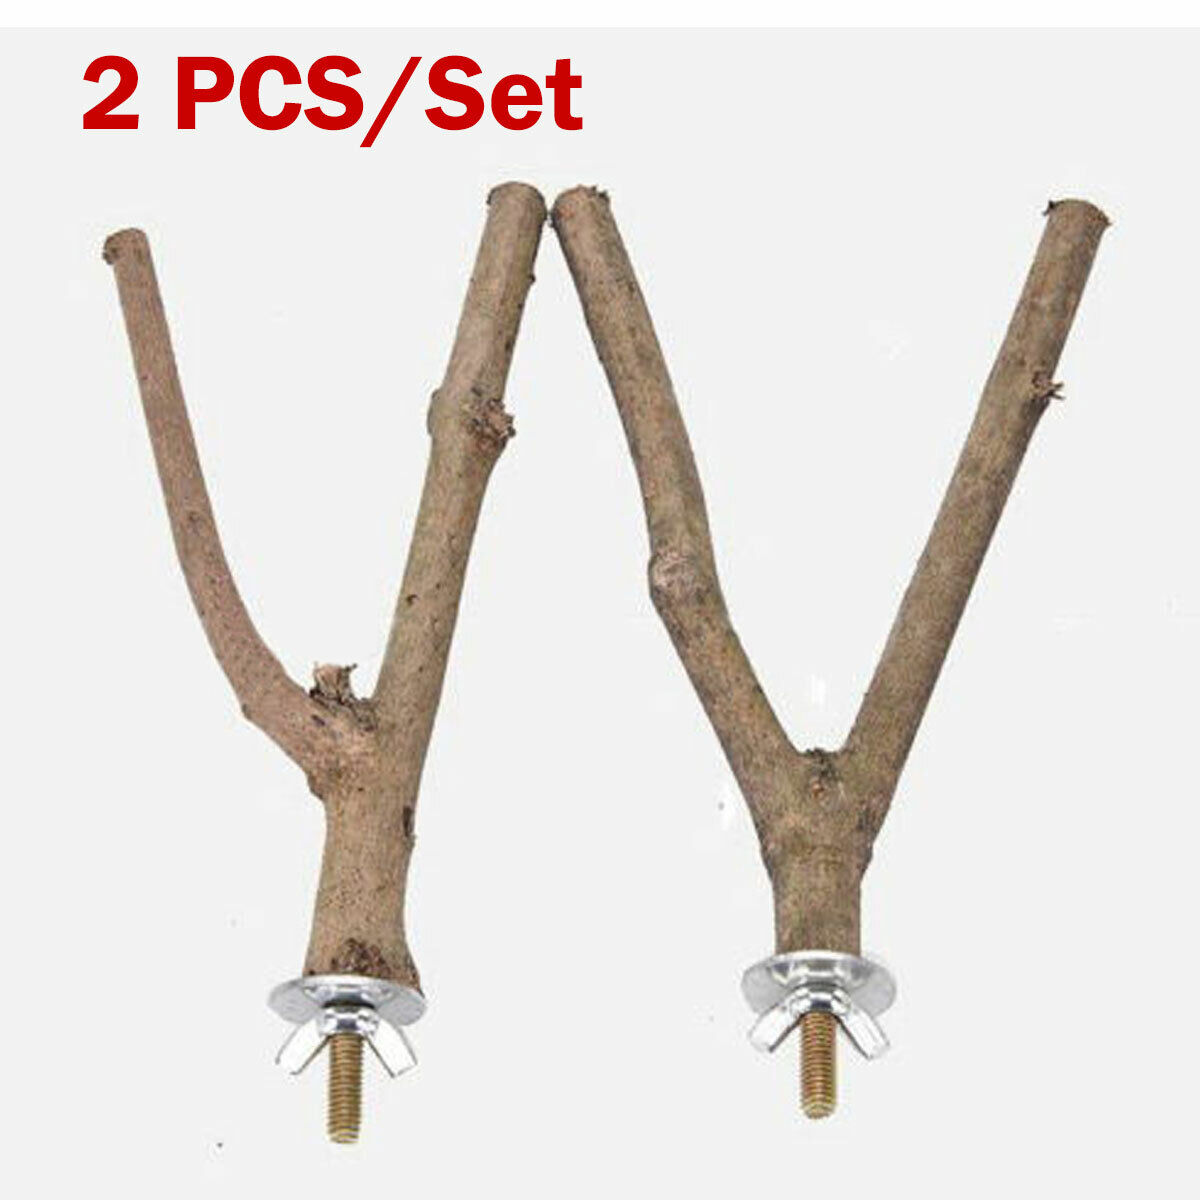 2X Parrot Raw Wood Stand Rack Pet Y Shape Branch Perches Toy Bird Cage Supply US